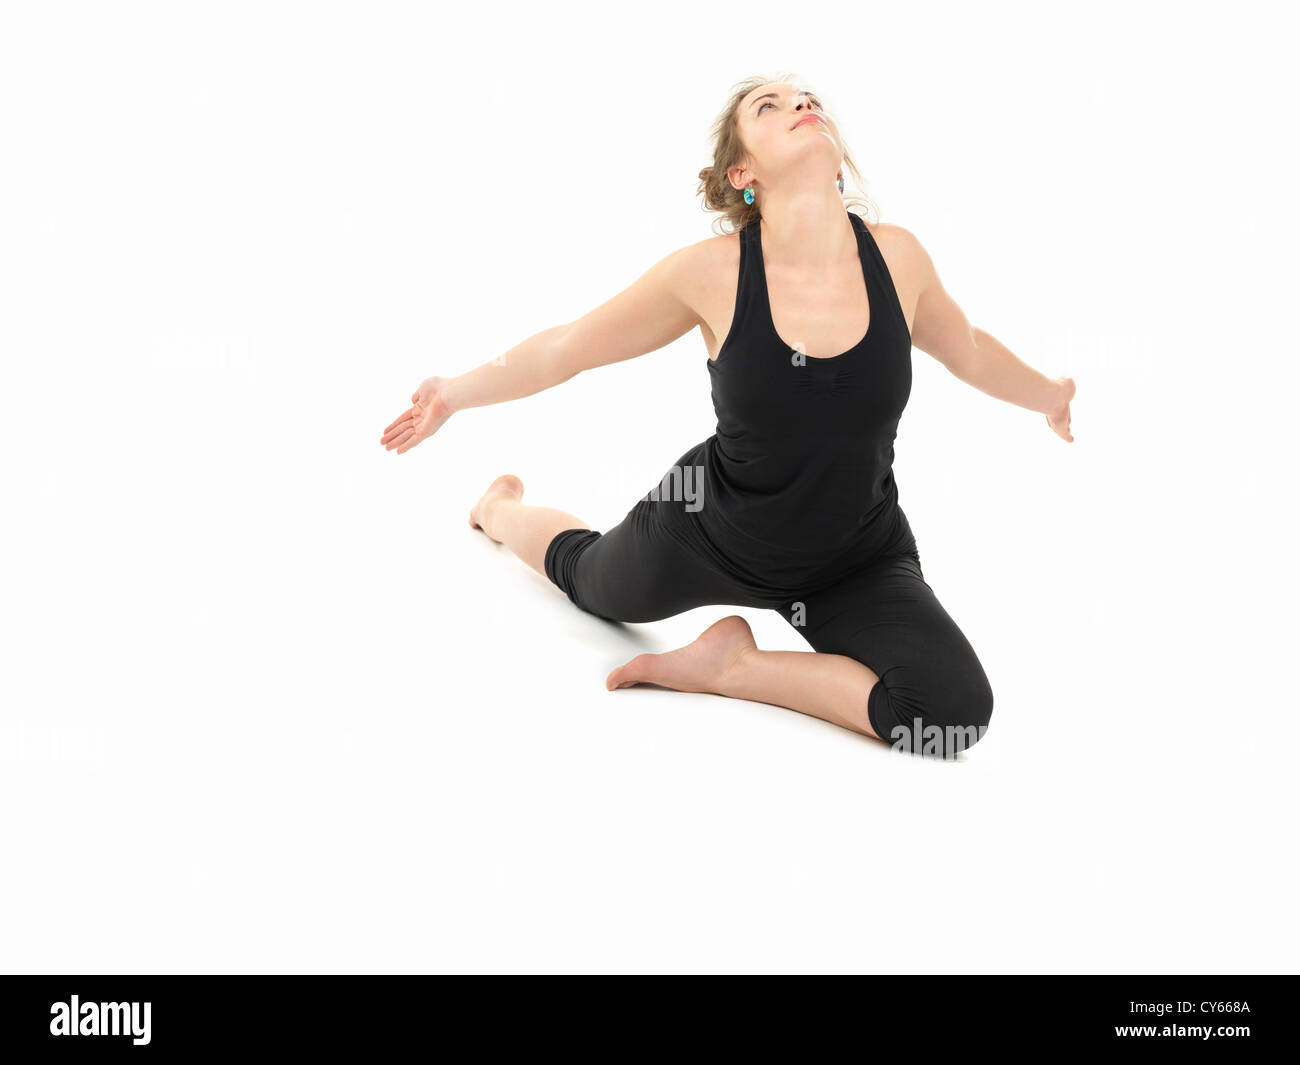 young slim girl in yoga pose, full frontal view, dressed in black, on white background Stock Photo